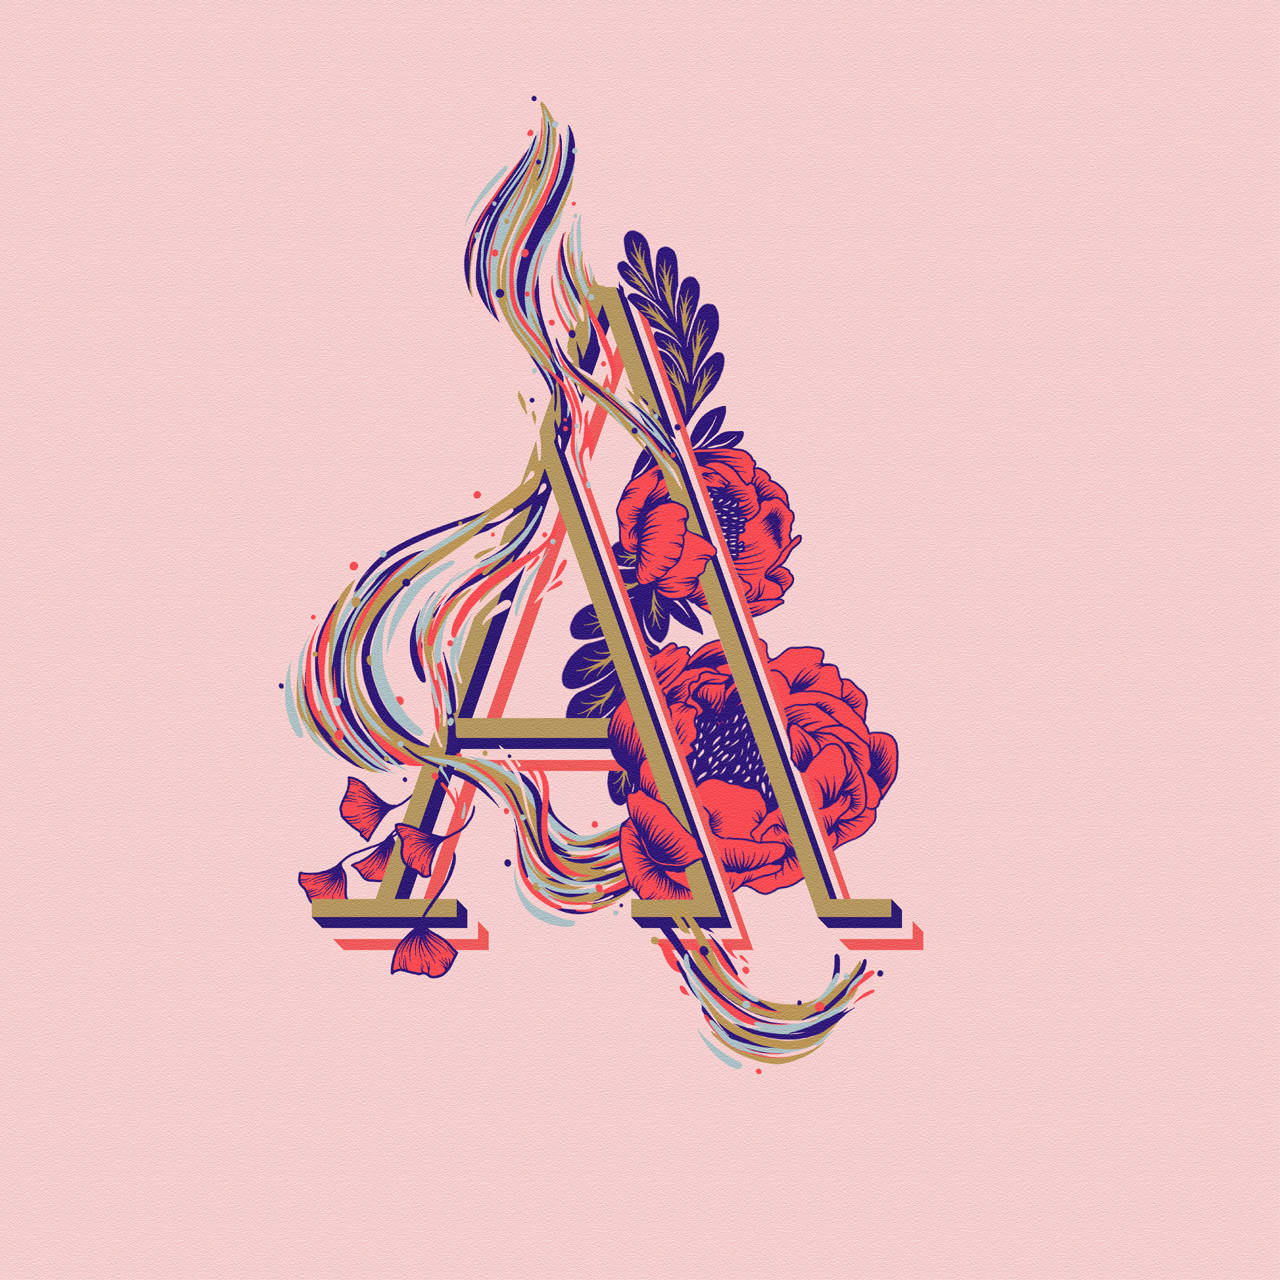 Capital Alphabet Letter A With Flowing Effect And Flowers Wallpaper